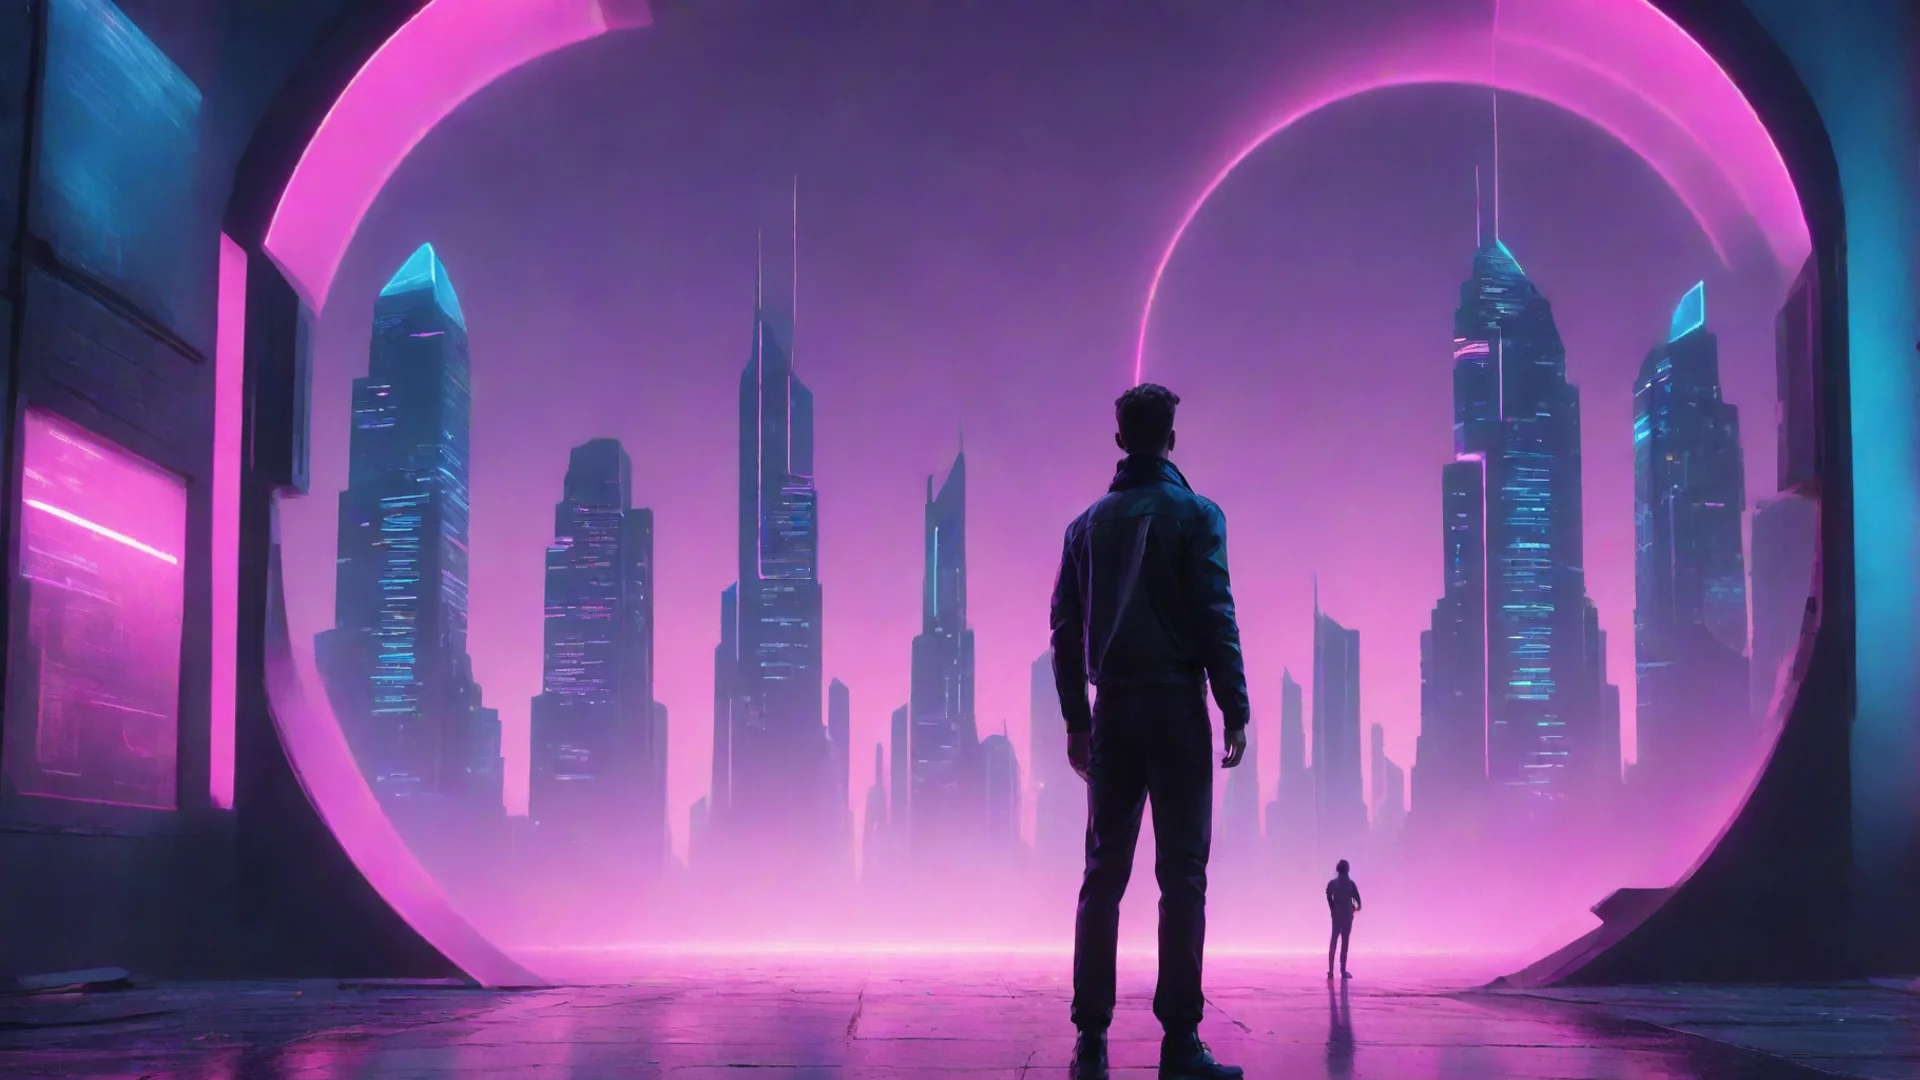 aiartstation art synthwave of a futuristic city and a man standing behind the portal confident engaging wow 3 wide